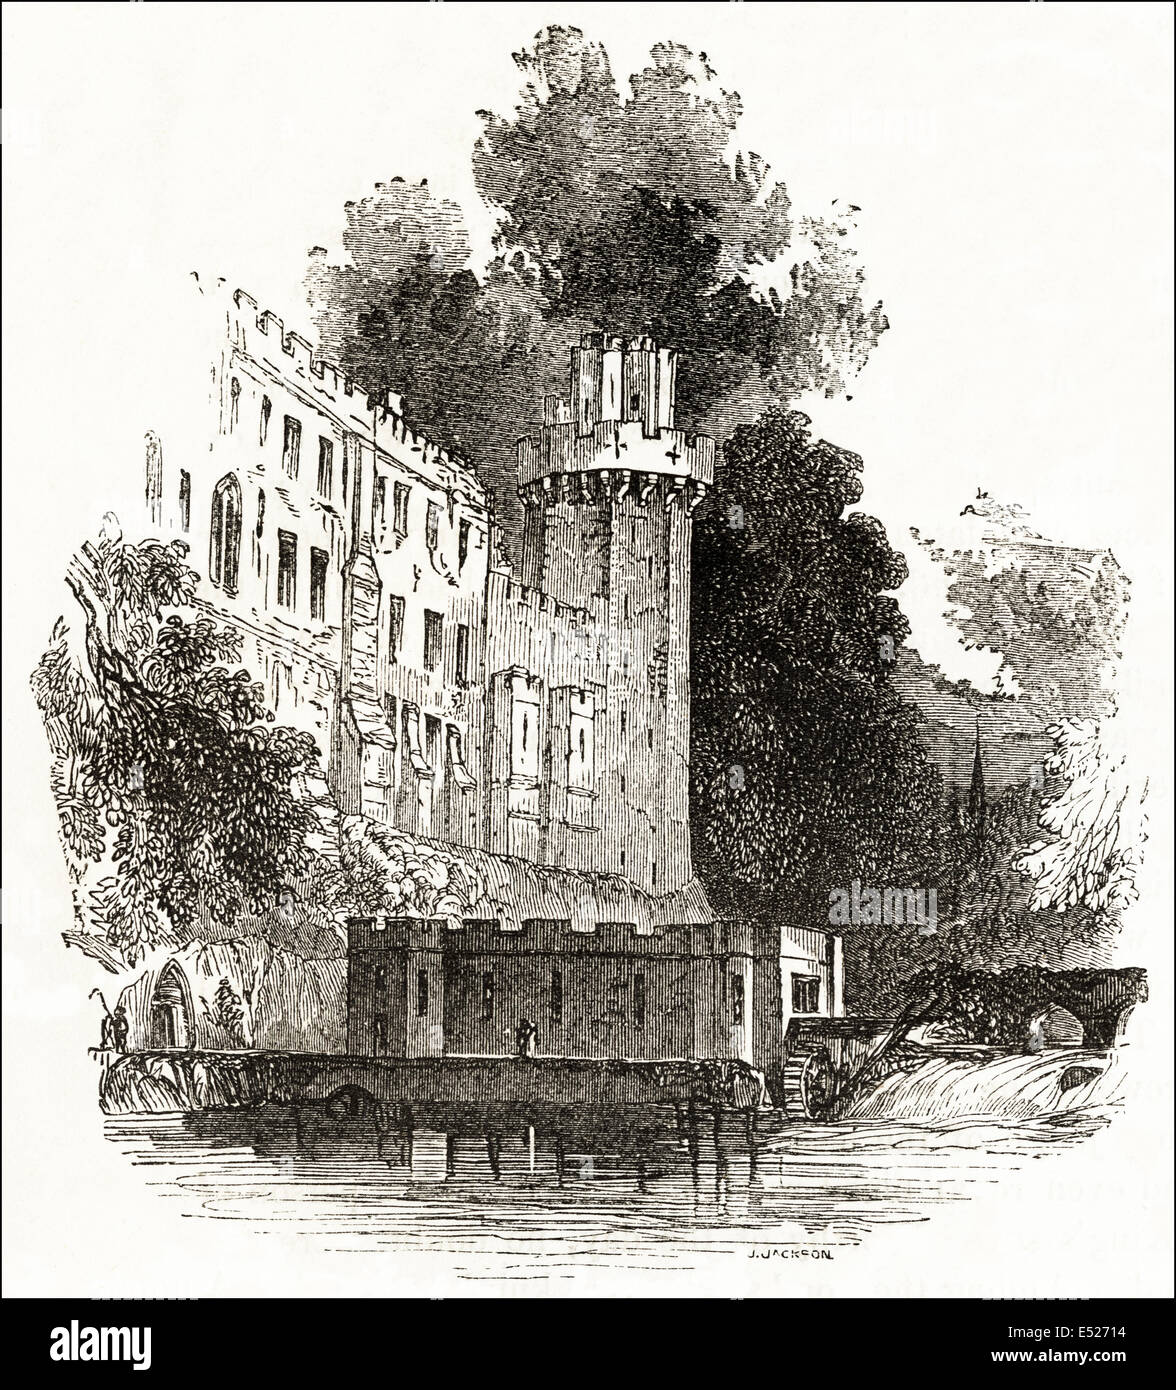 View over Castle Mill & River Avon of Warwick Castle built in 1068. Victorian woodcut engraving circa 1845. Stock Photo